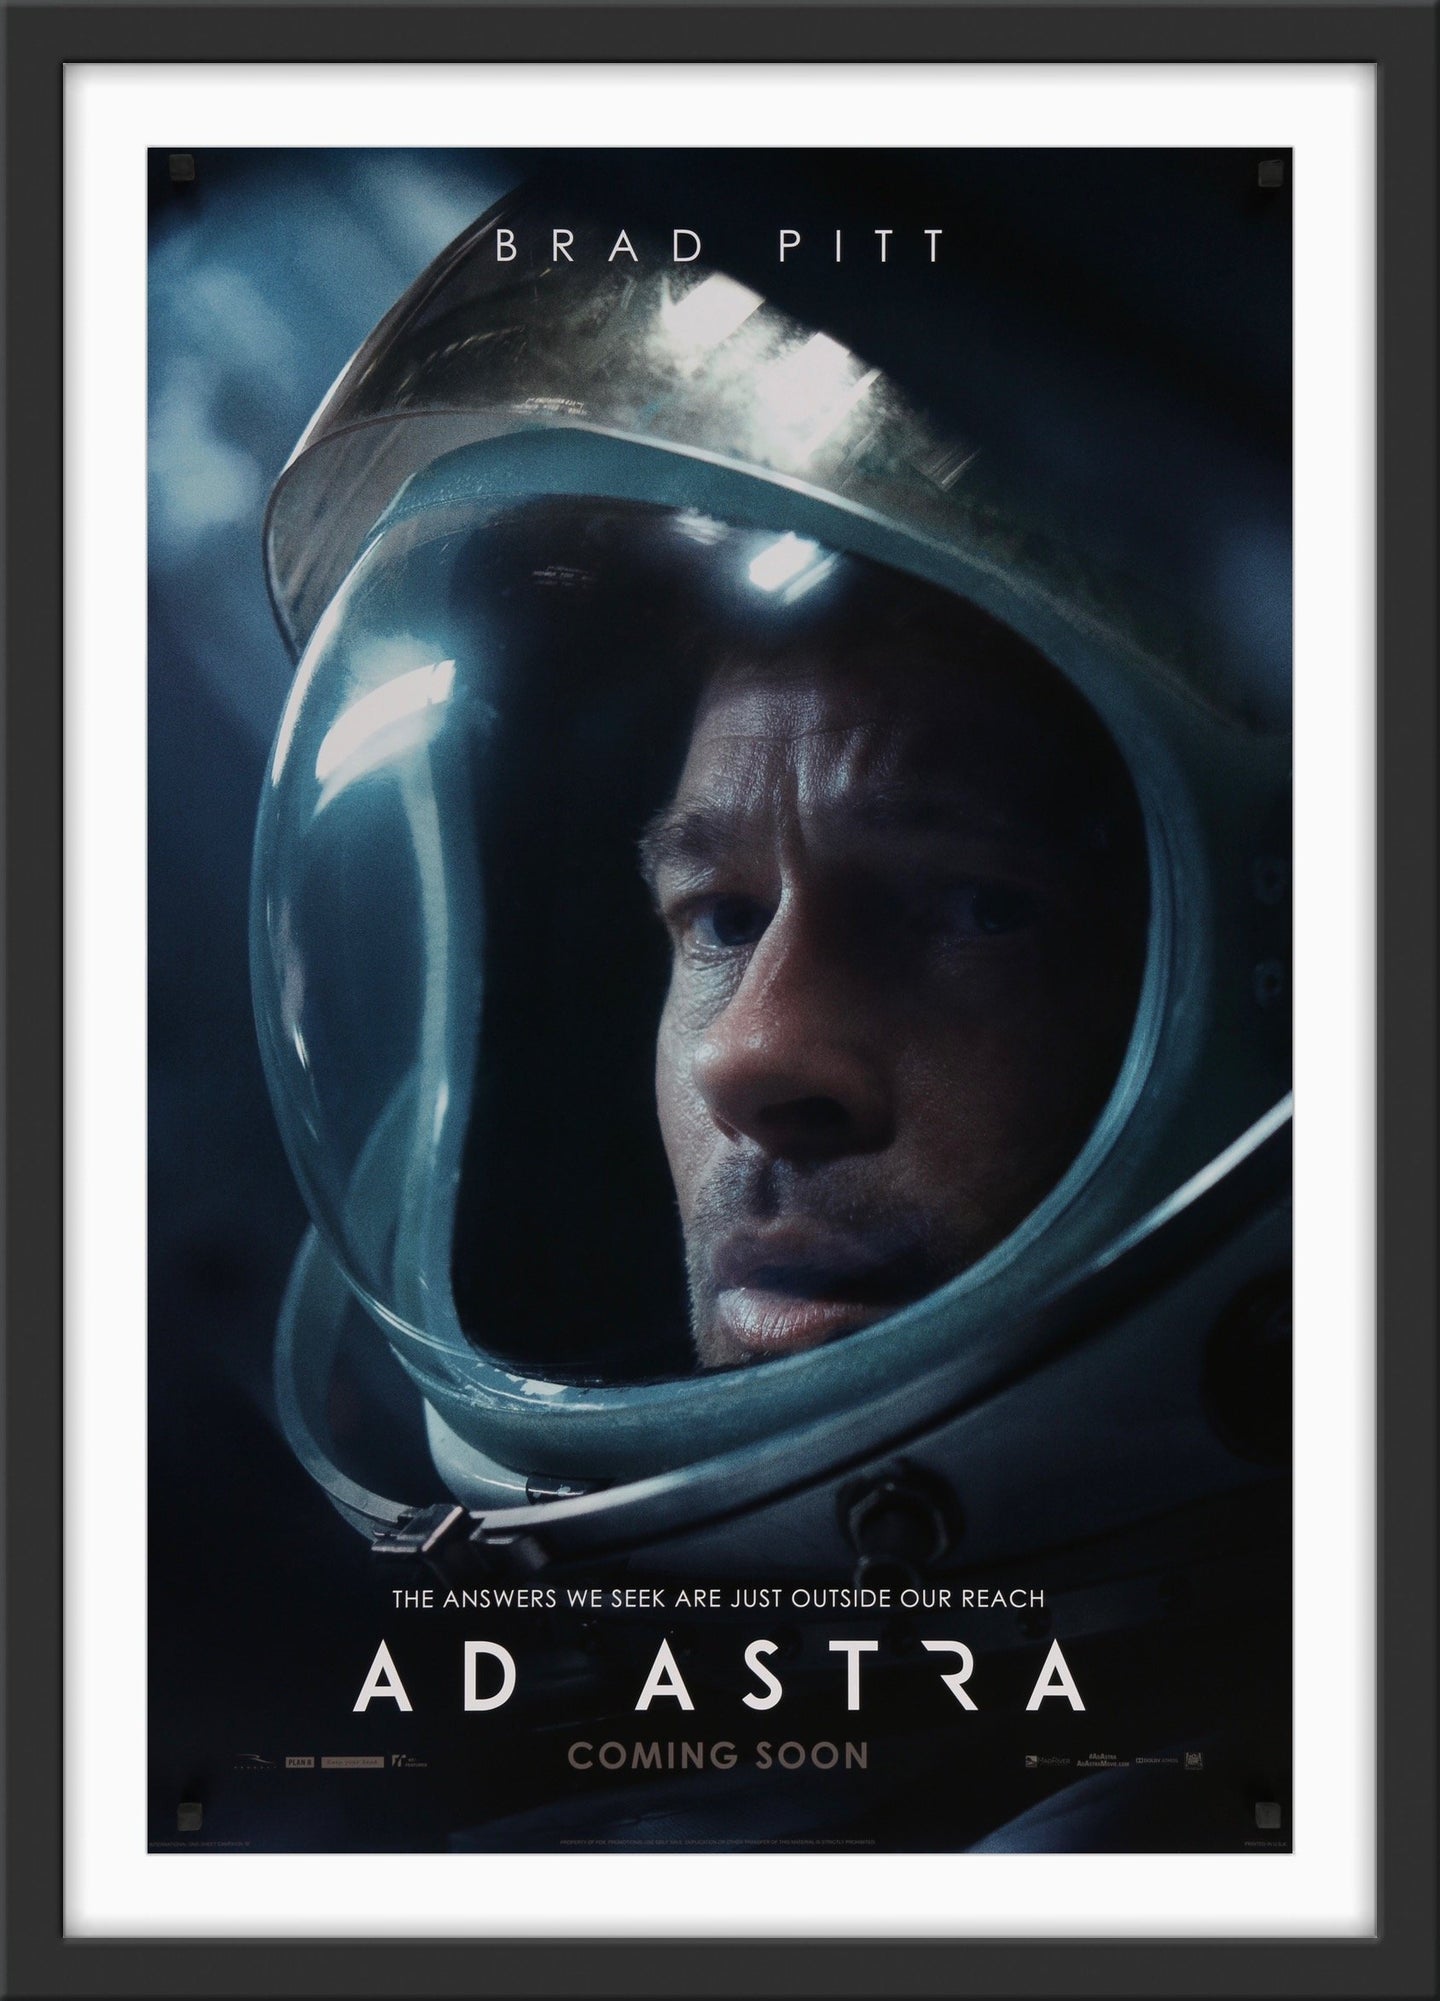 An original movie poster for the film Ad Astra with Brad Pitt